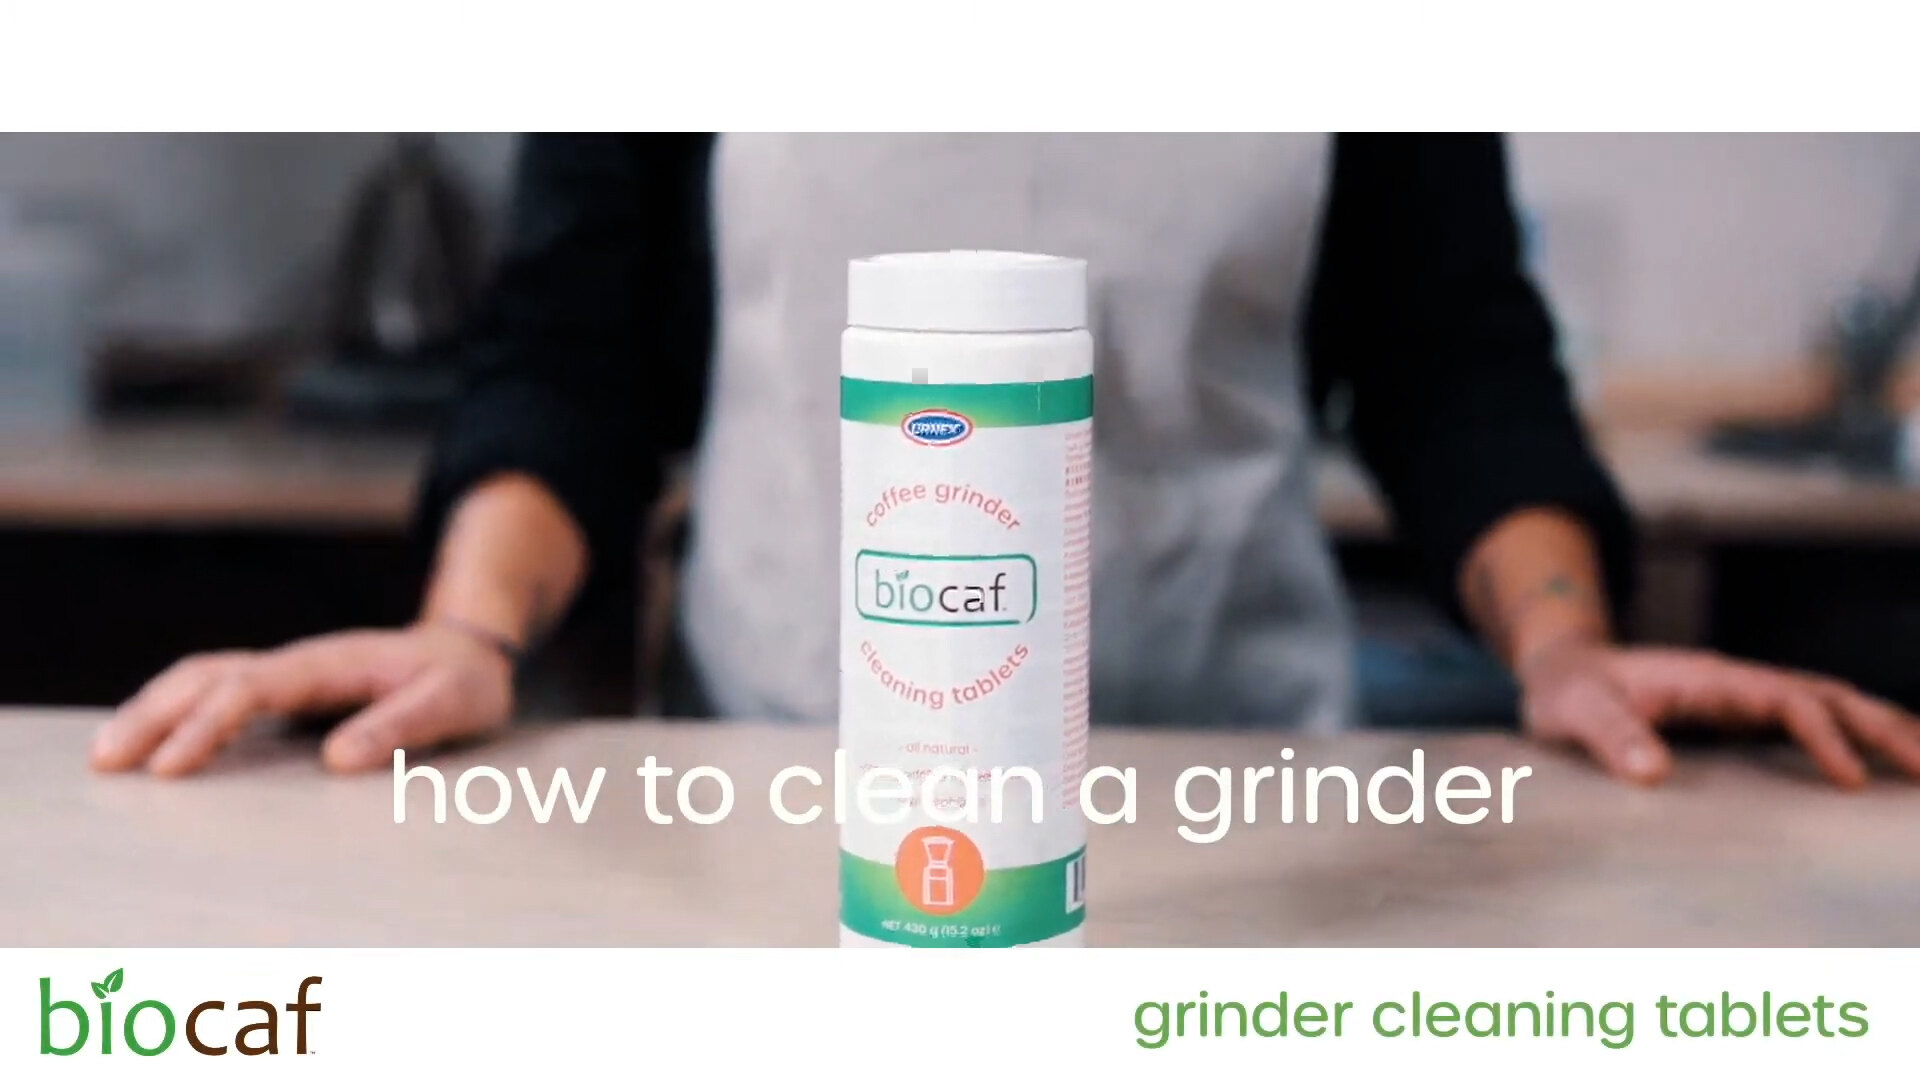 How to Clean a Coffee Grinder with Urnex Grindz - Video